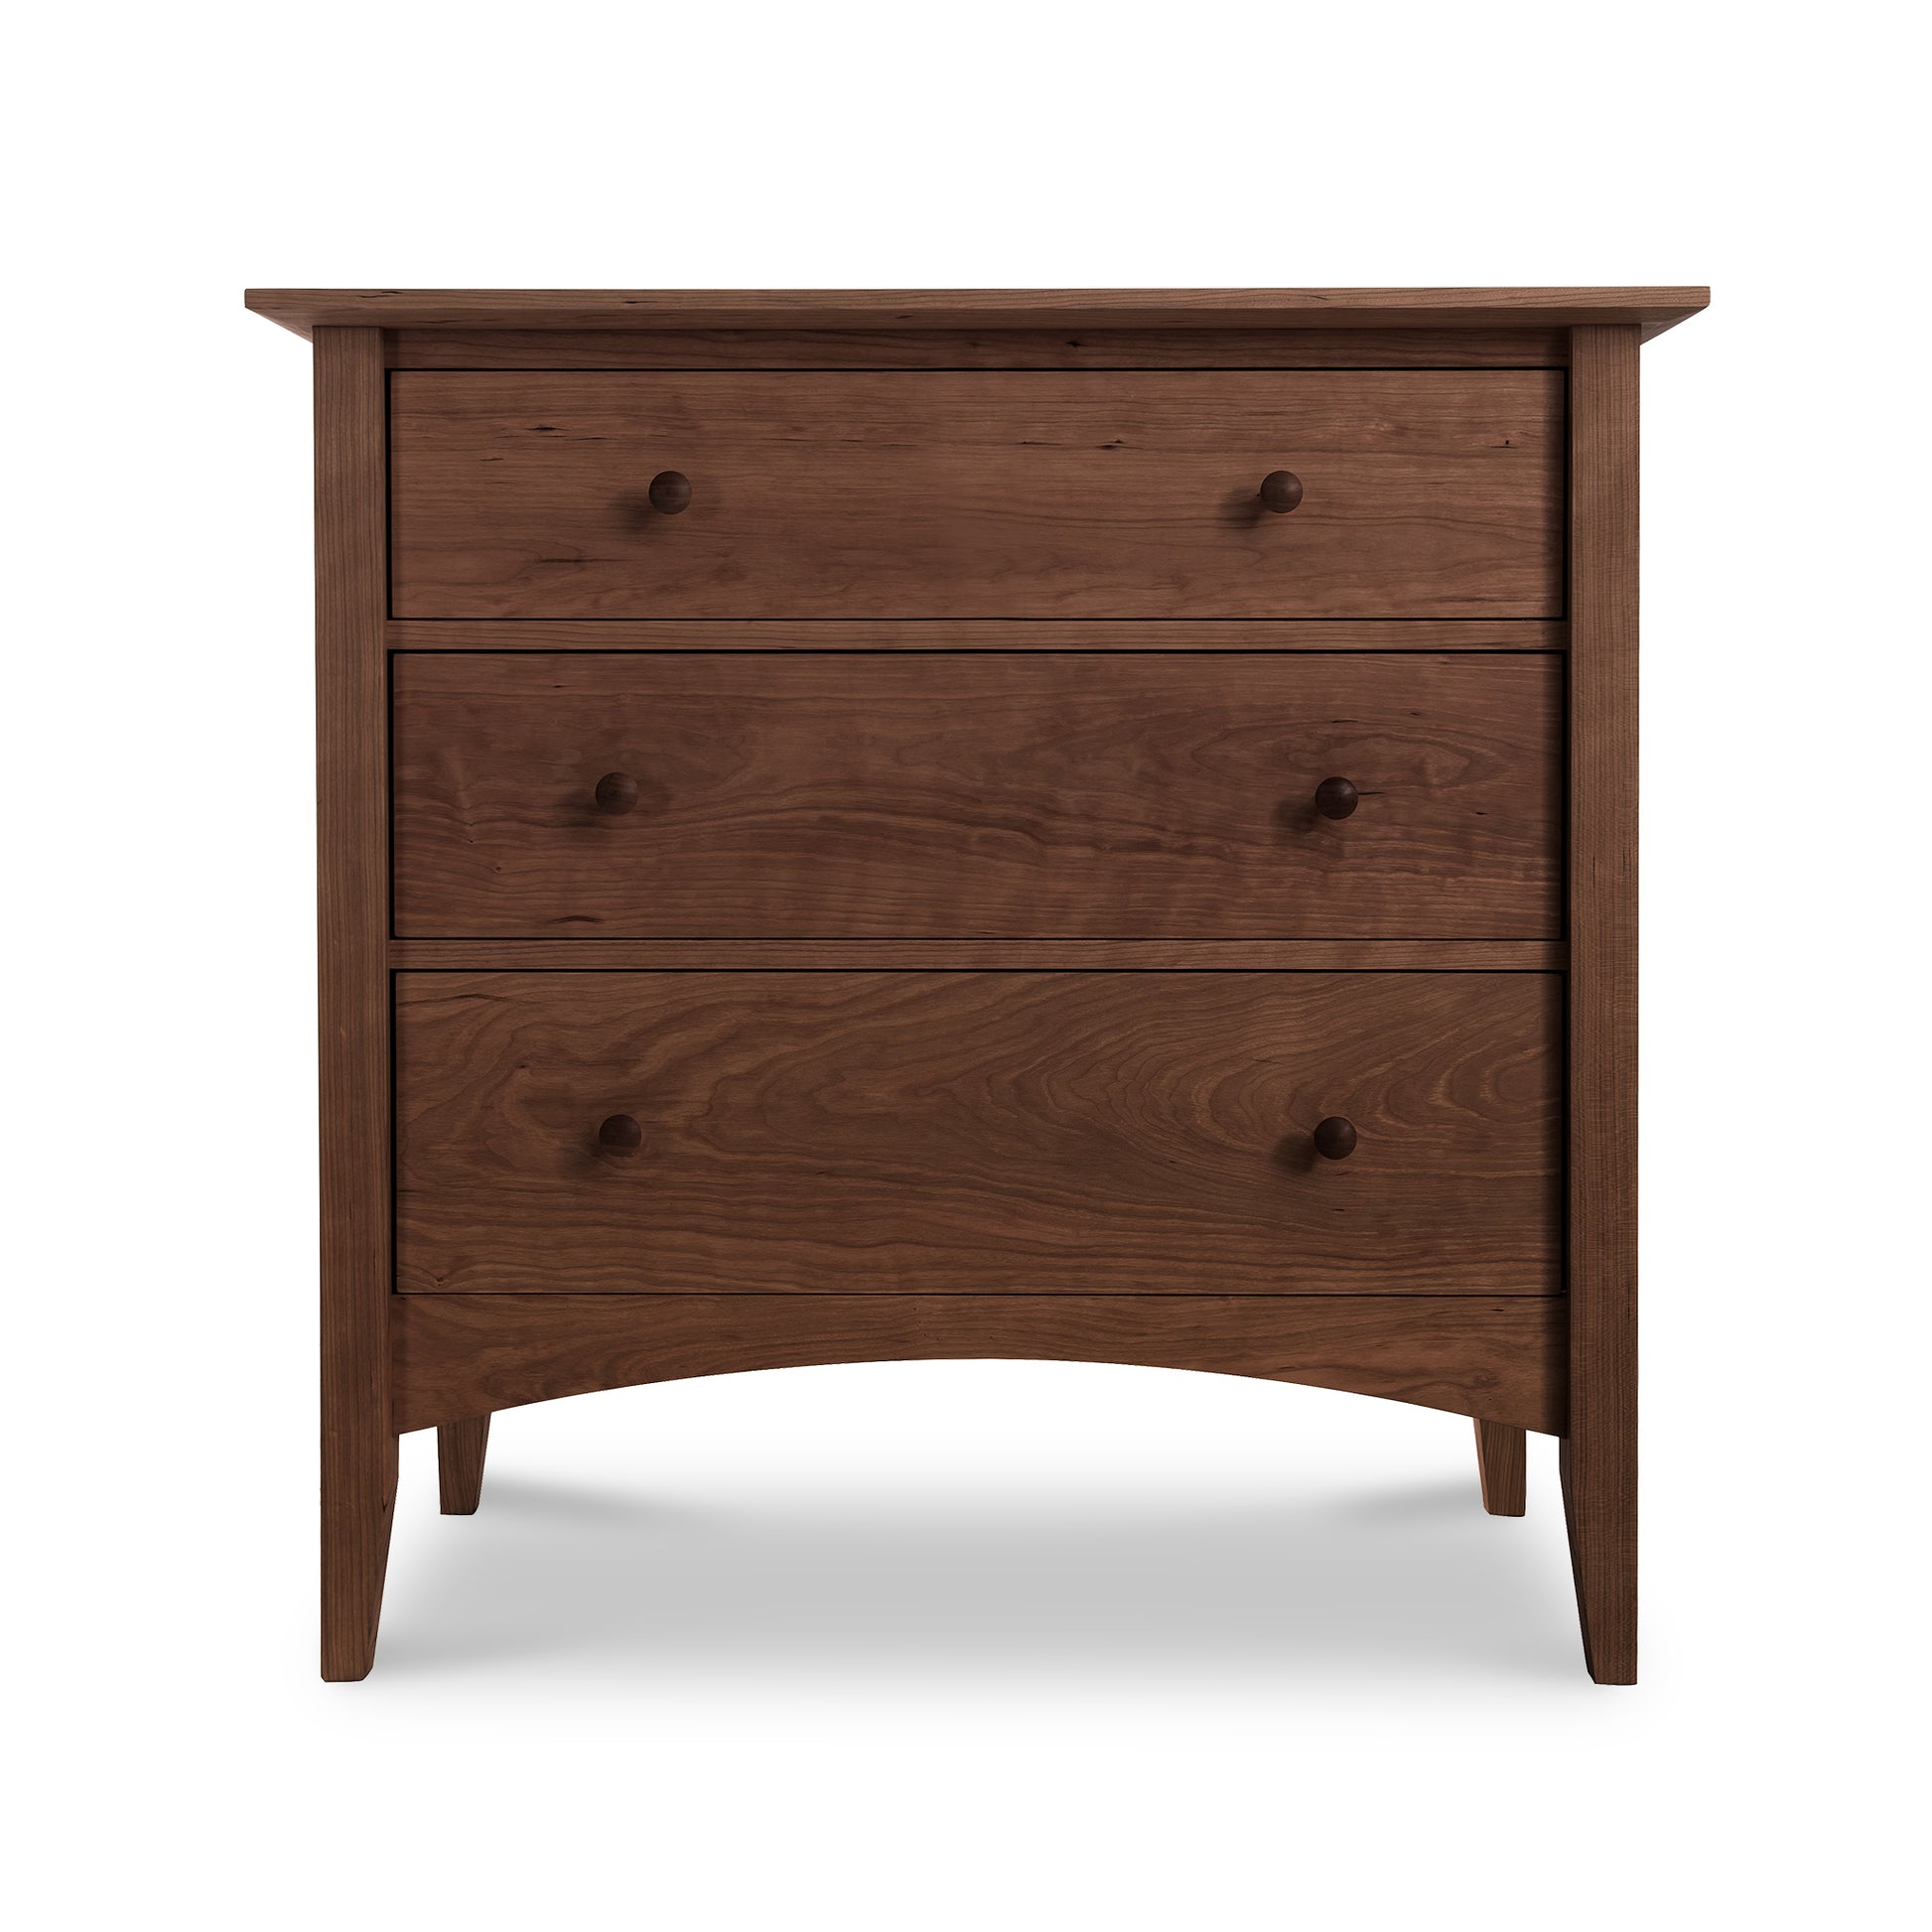 A Maple Corner Woodworks American Shaker 3-Drawer Chest with a smooth finish and round knobs, standing against a white background.